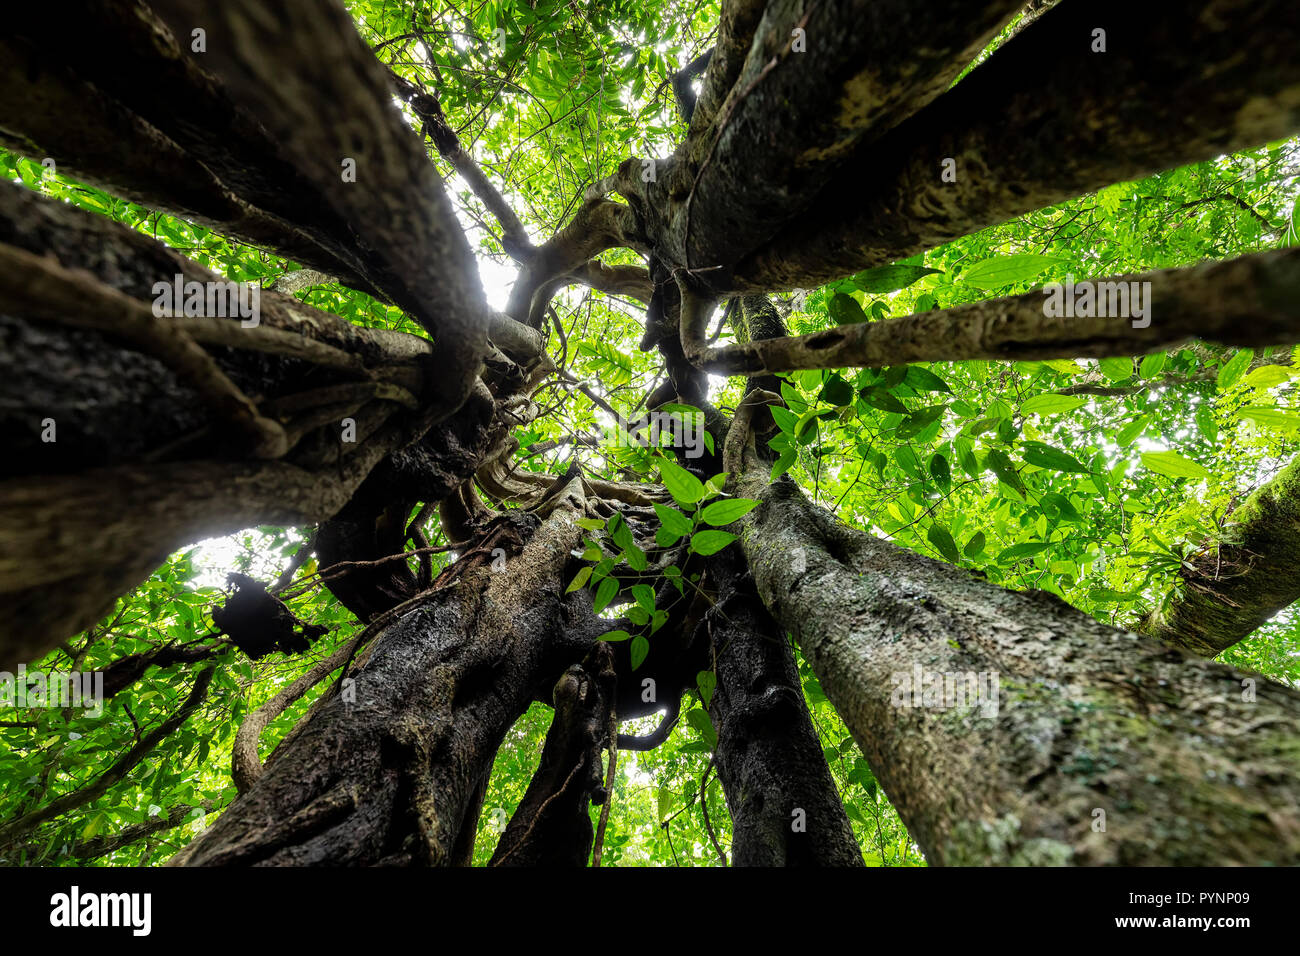 Dynamic wide angle shot inside the bark of a ficus tree, Munduk forest, Bali, IndonesiaI Stock Photo